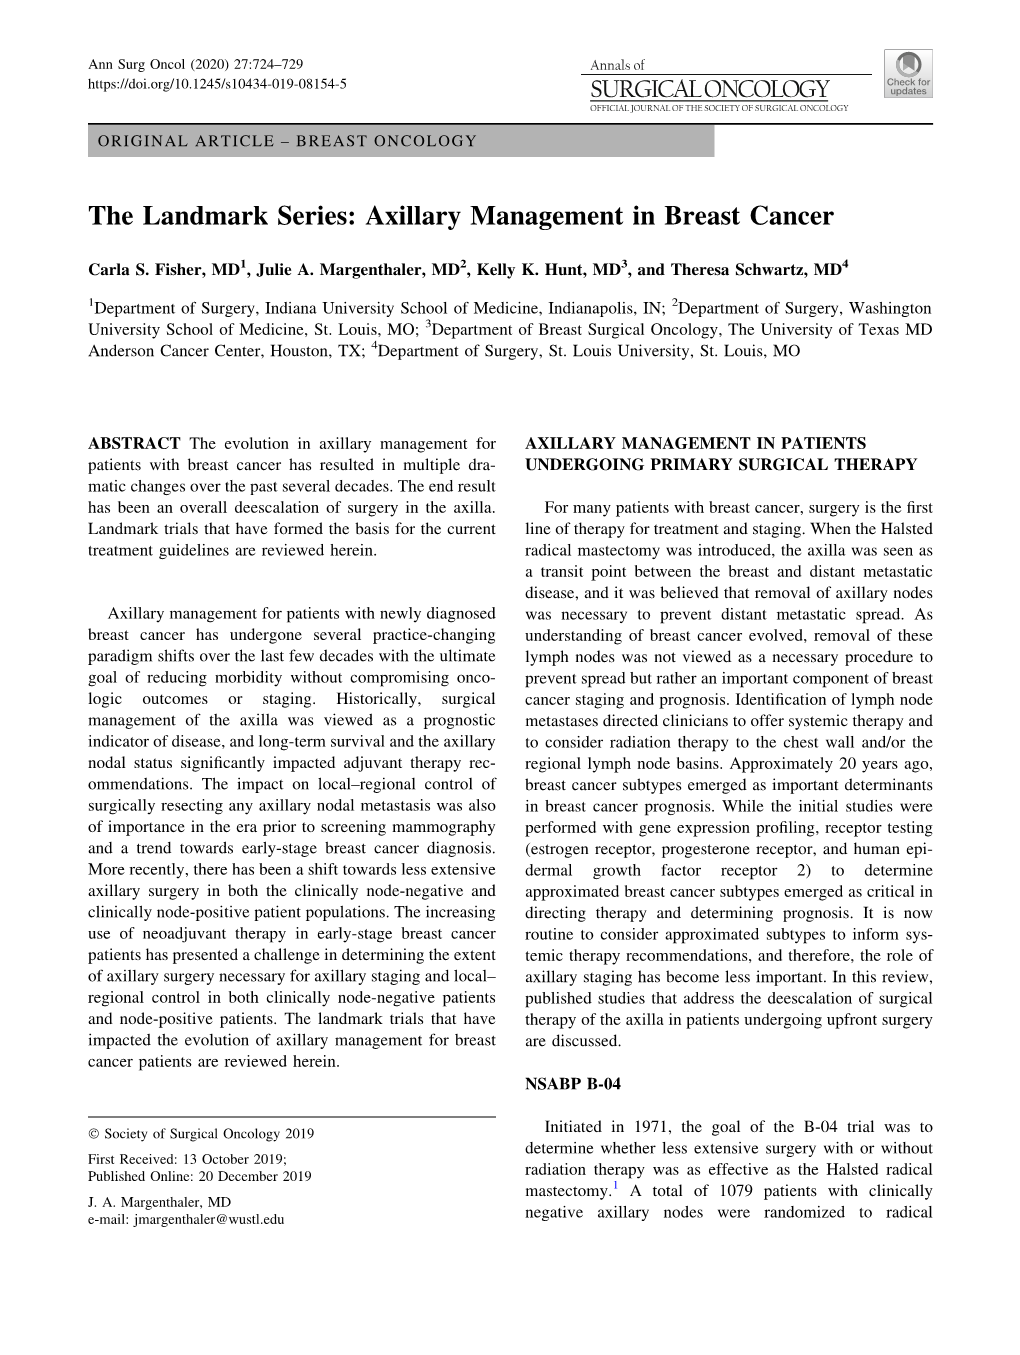 The Landmark Series: Axillary Management in Breast Cancer